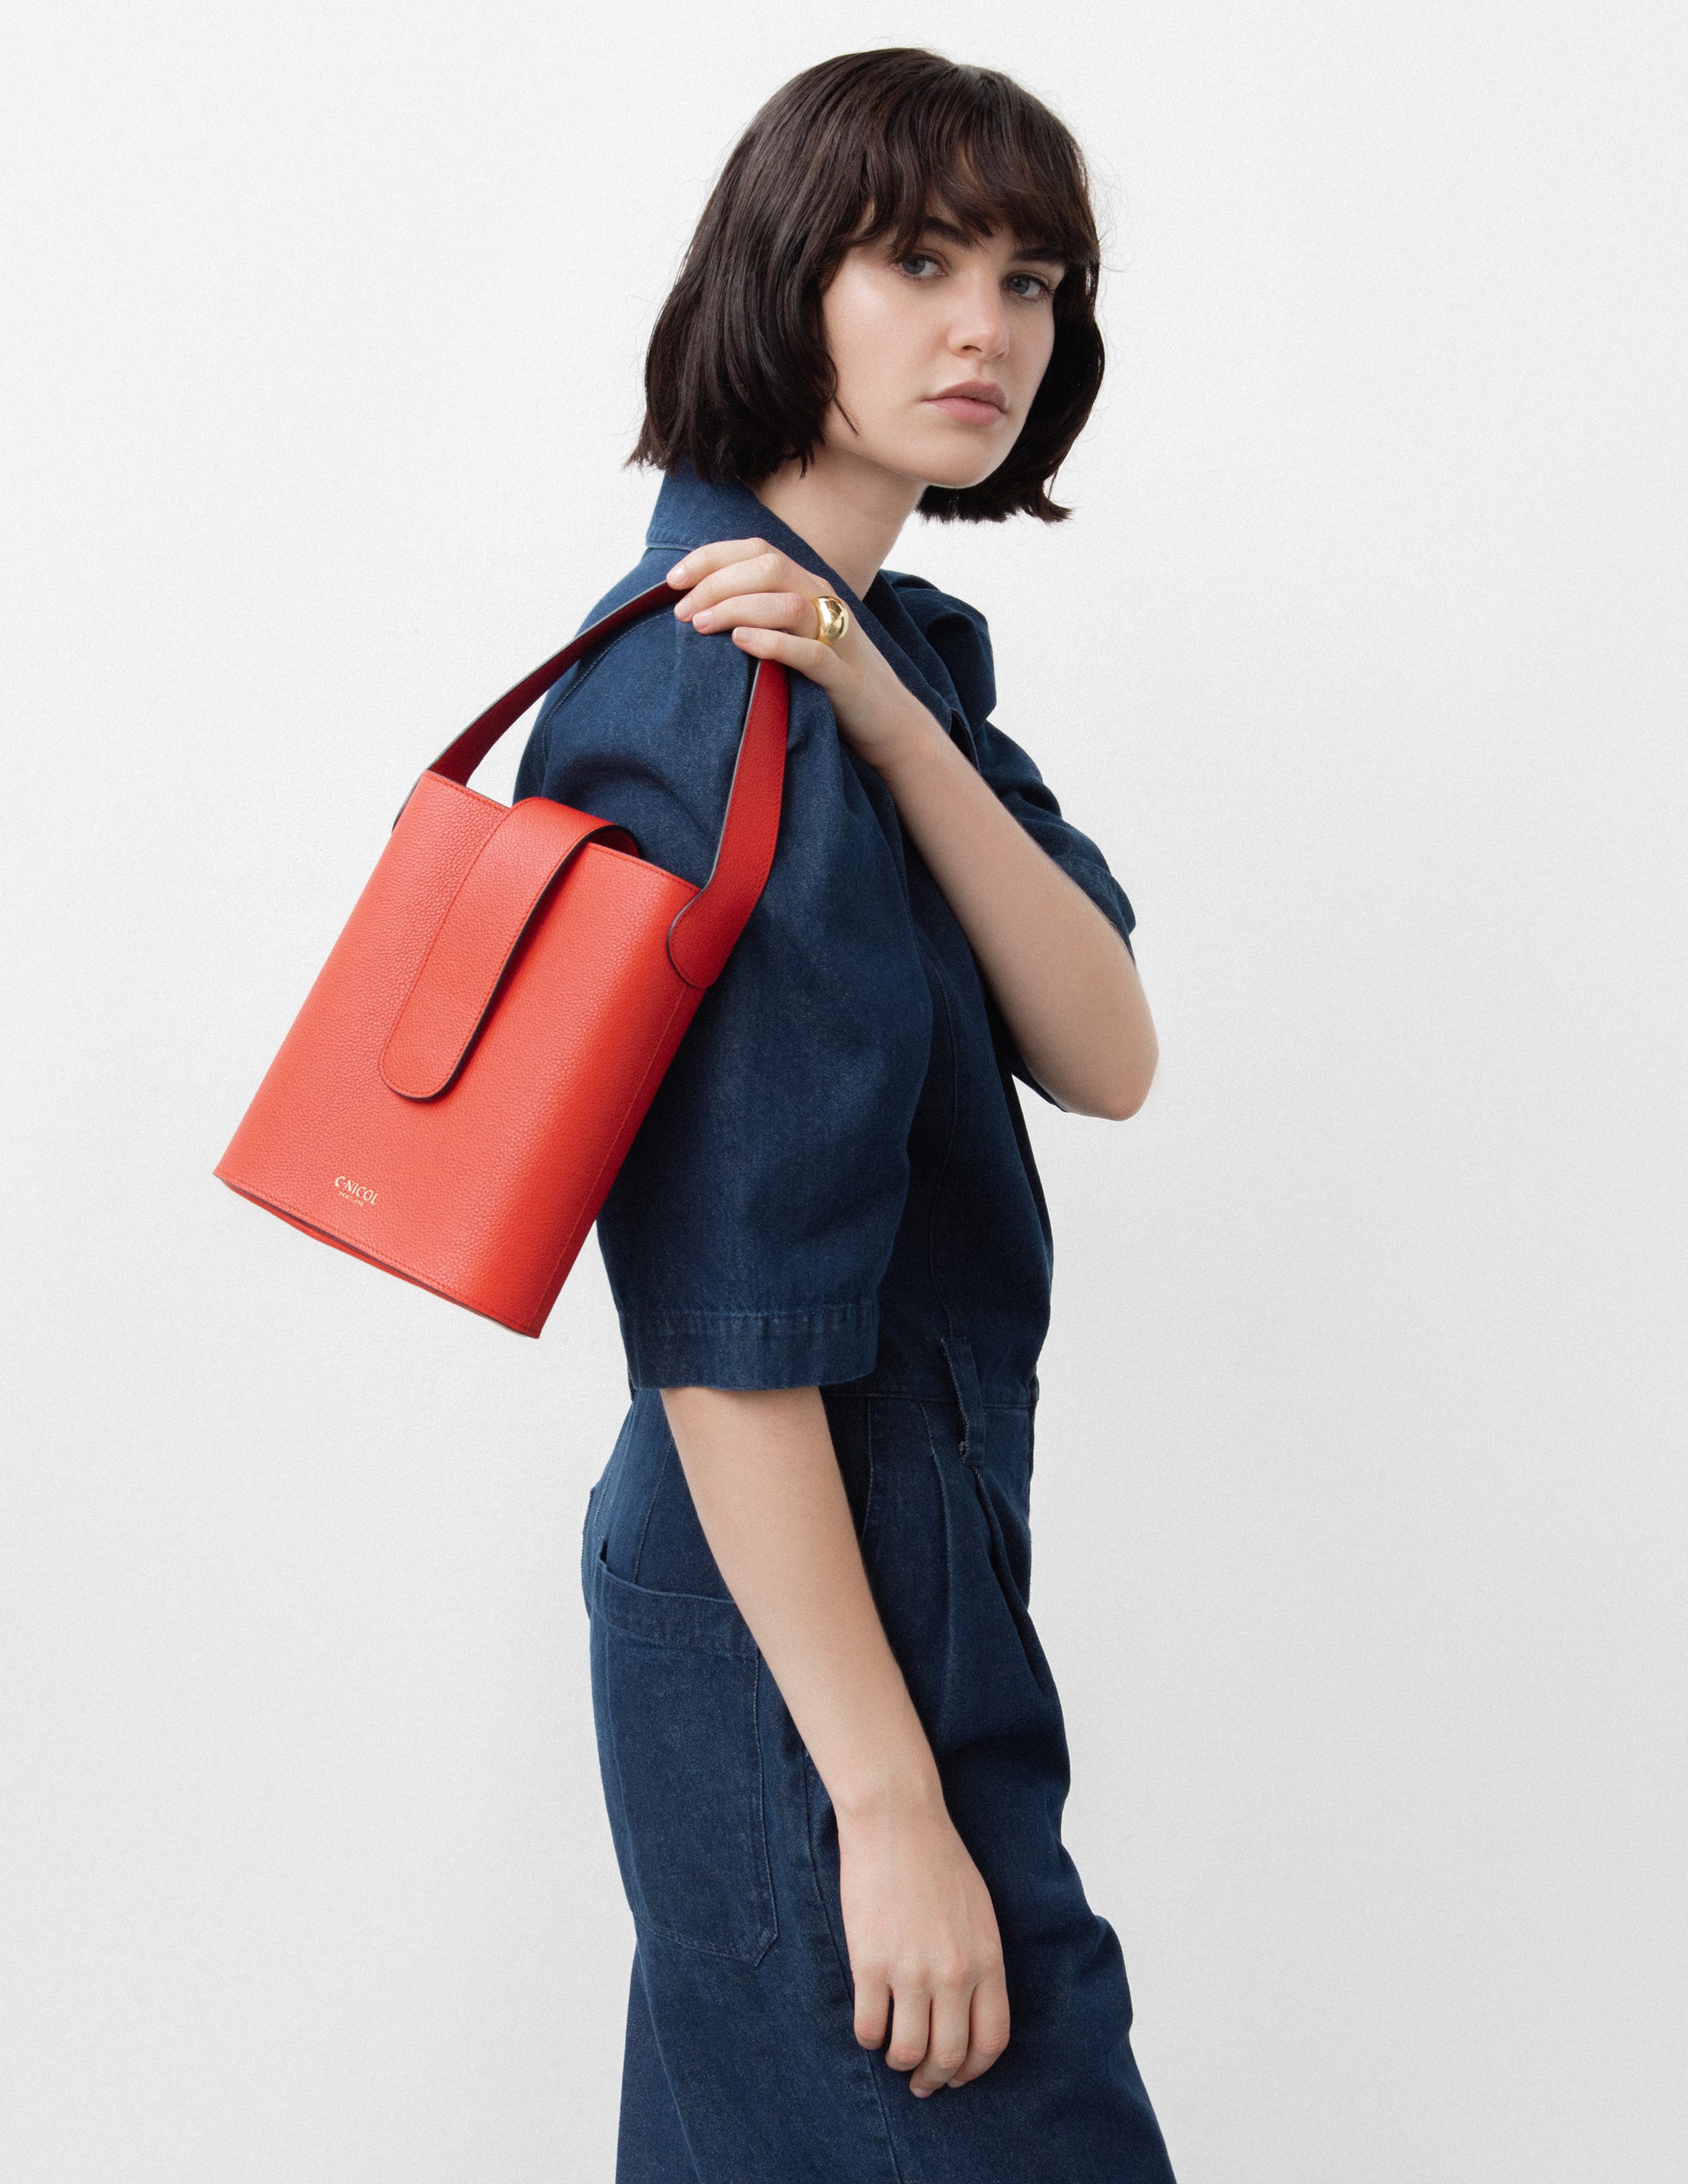 CNicol Red Leather Bag held by model wearing a navy blue jumpsuit with the bag slung over her right shoulder